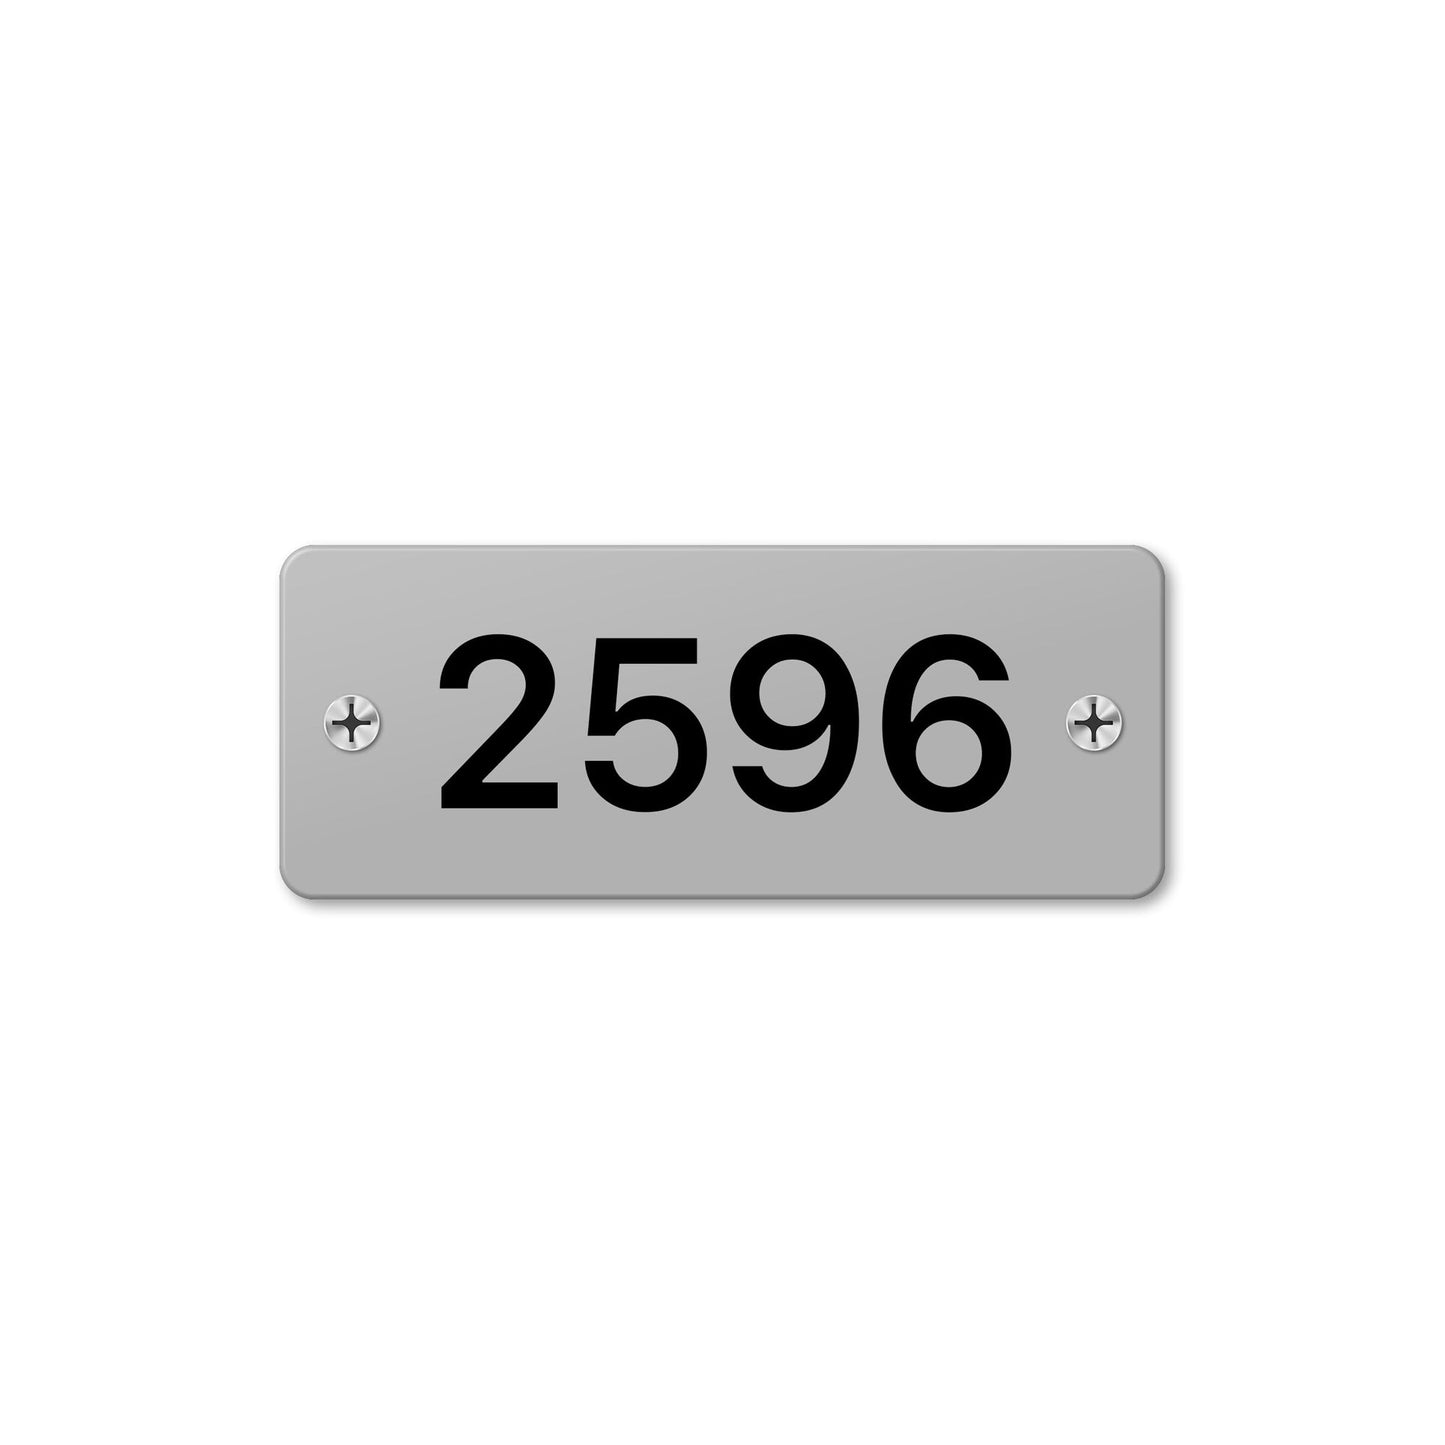 Numeral 2596